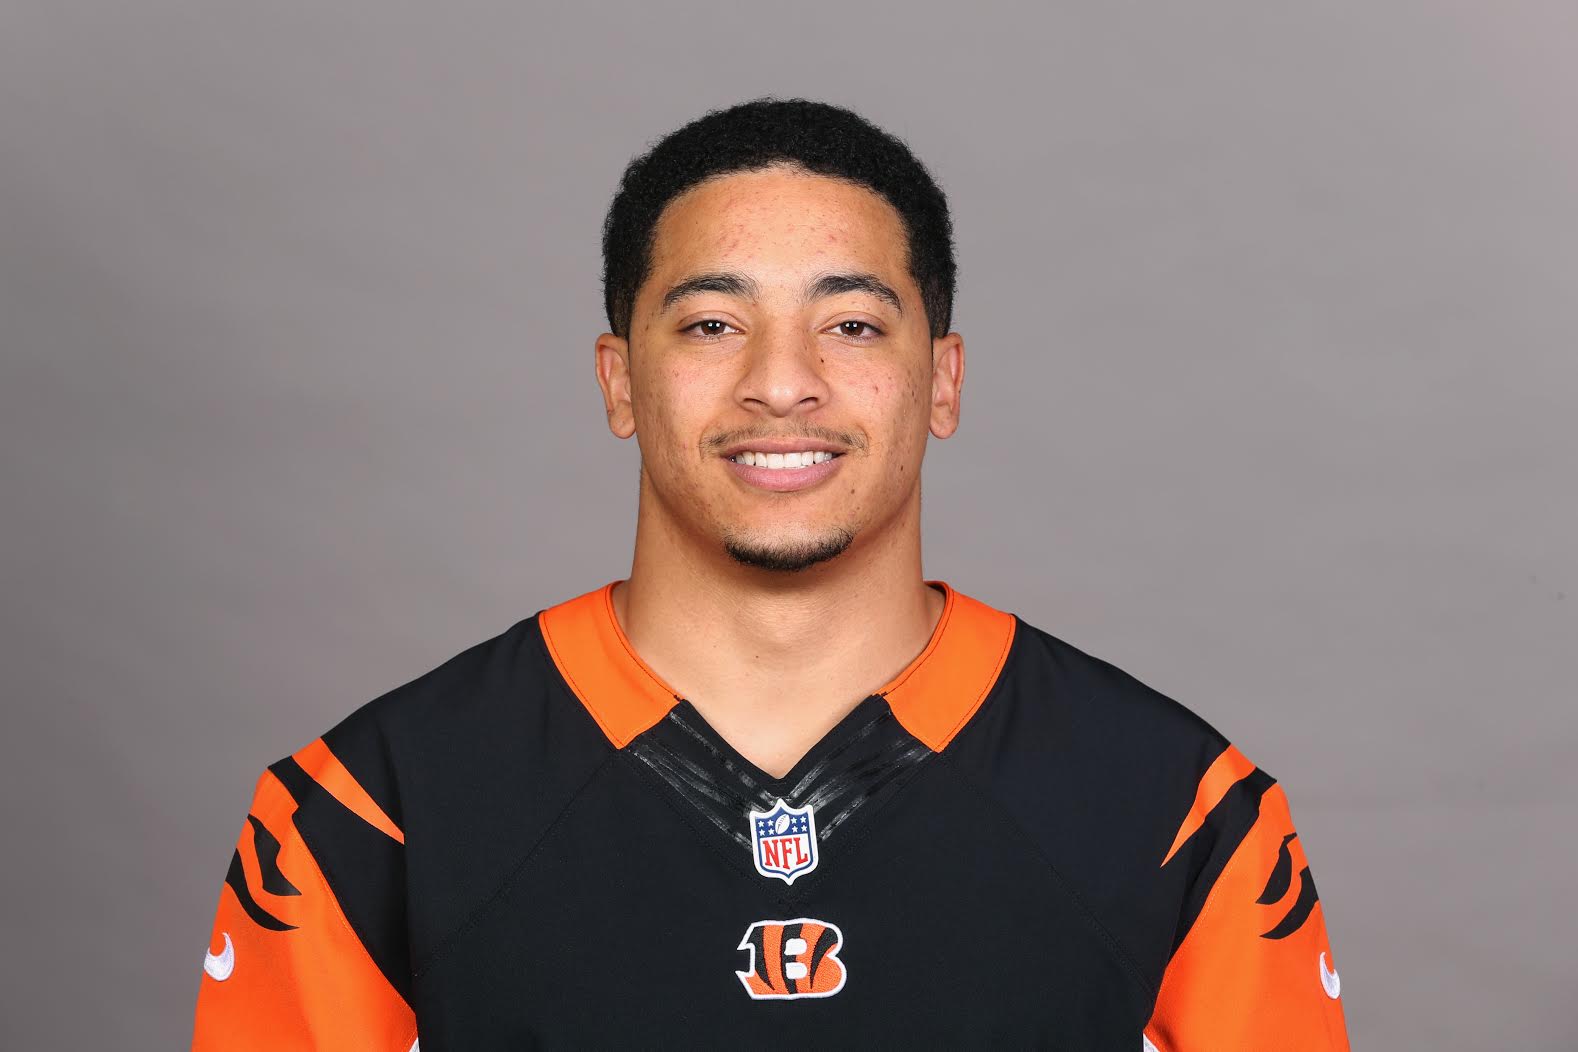 Rookie safety Derron Smith — a former Bulldog and 2015 sixth-round draft pick — made the cut for the Cincinnati Bengals. (Photo courtesy of Cincinnati Bengals)